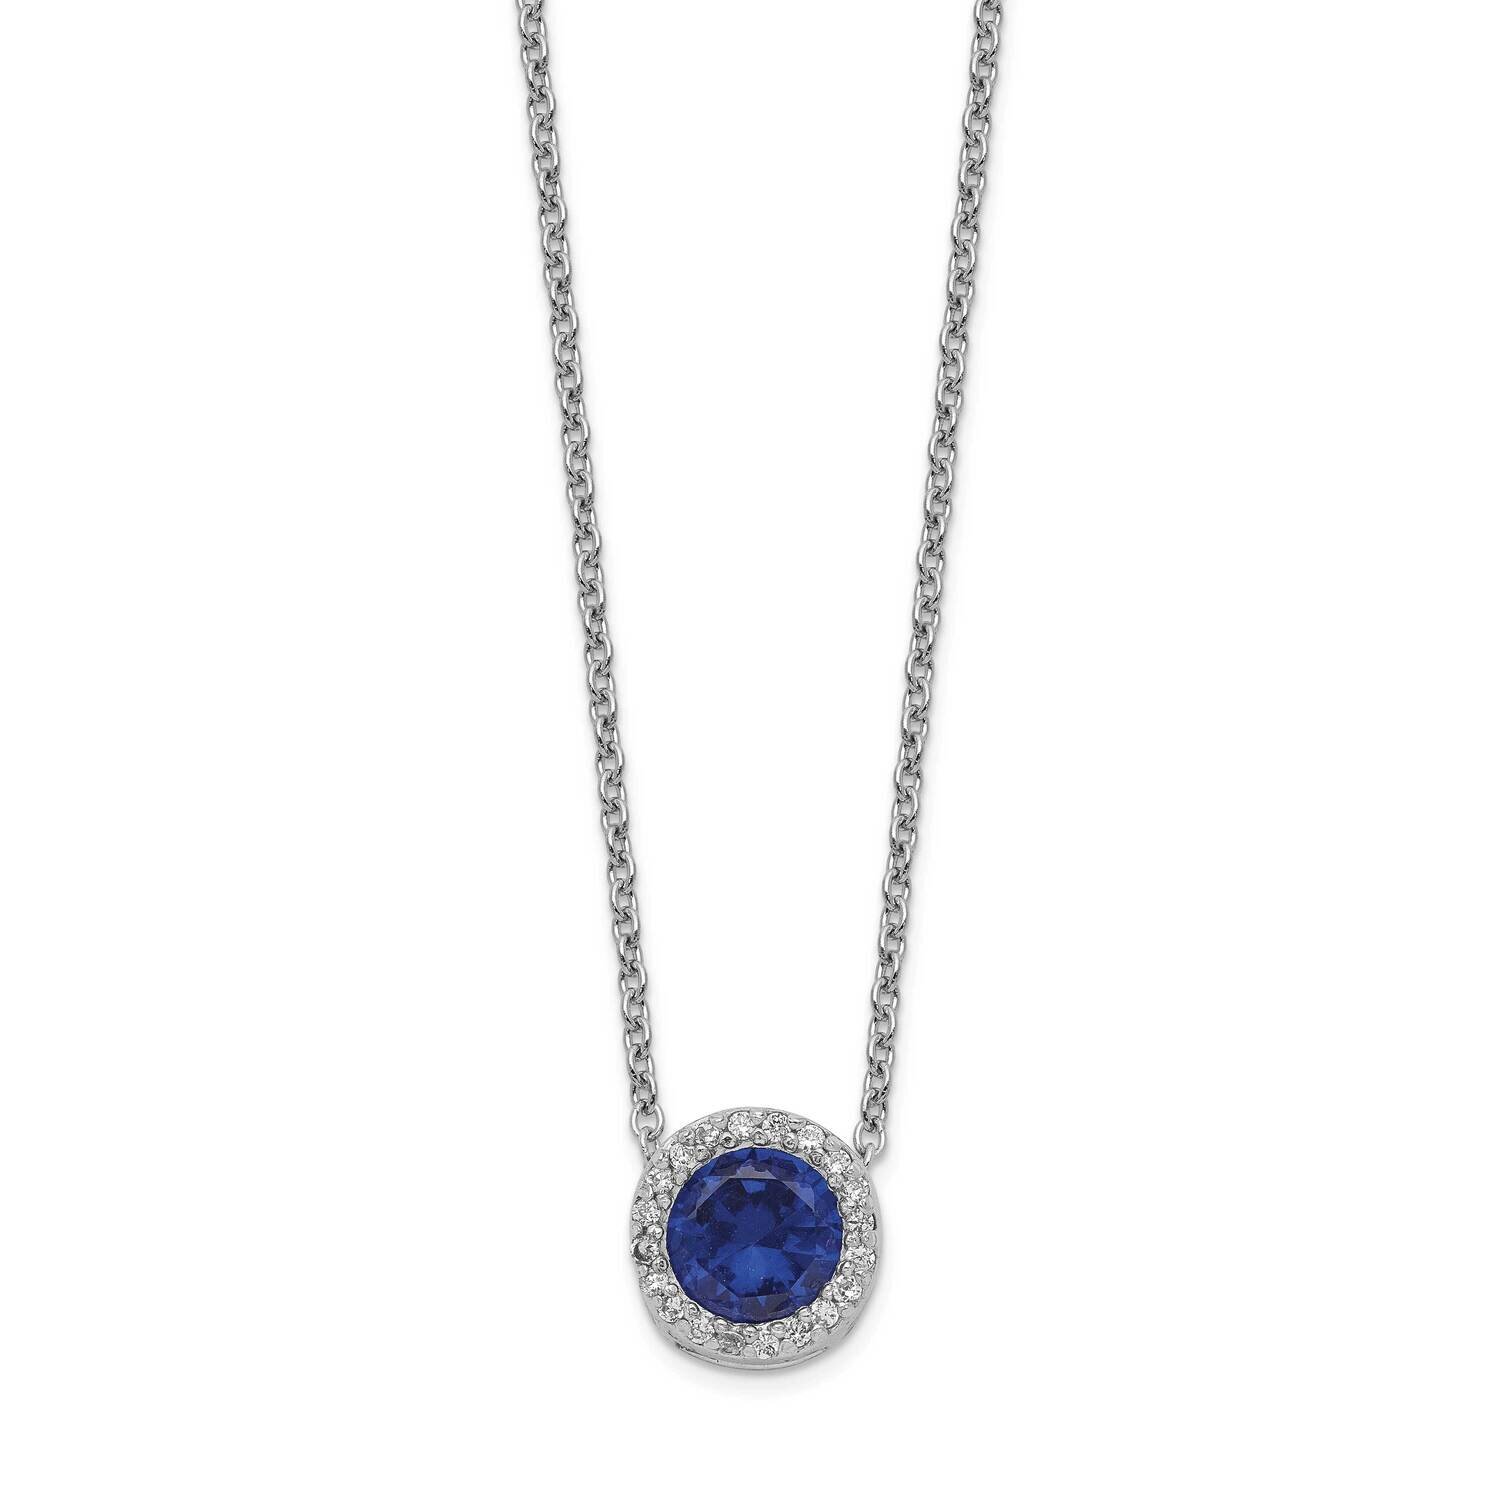 CZ Diamond & Created Blue Spinel 18.25 Inch Necklace Sterling Silver Rhodium-plated QCM1398-18.25